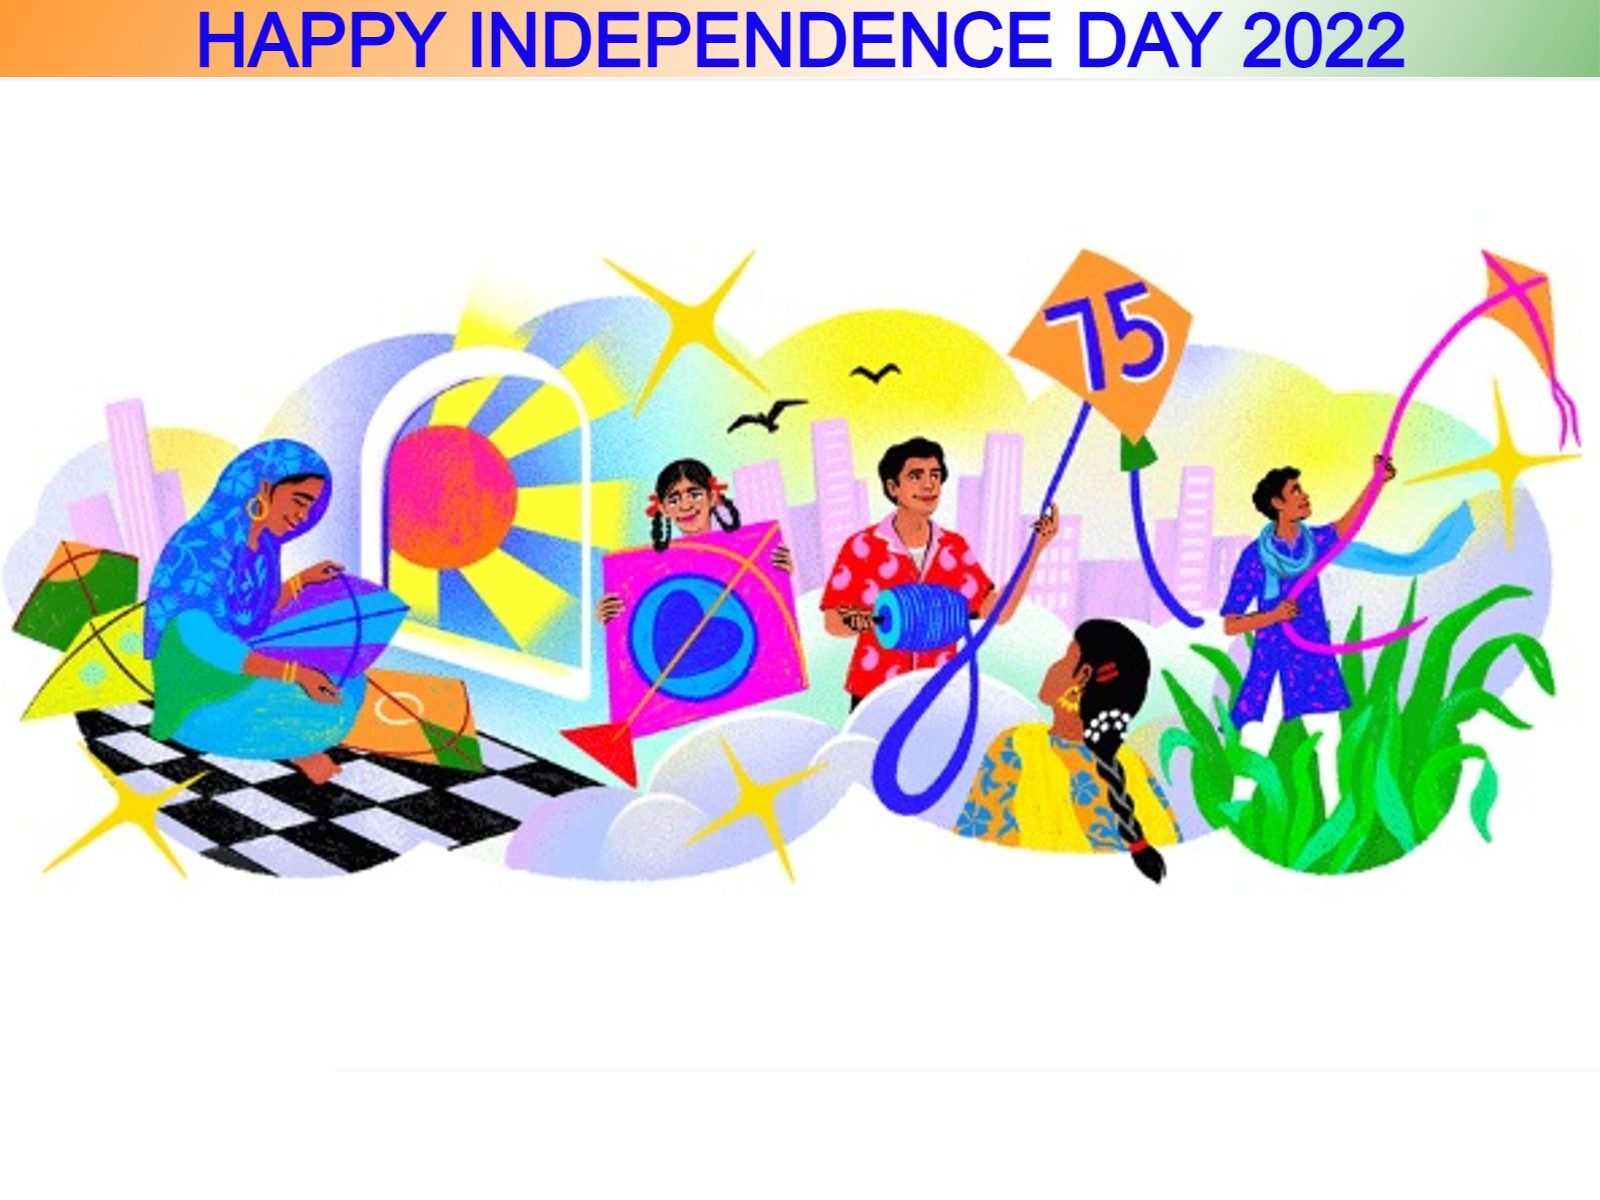 Happy Independence Day 2022 Wishes Quotes 15 August Images HD Wallpapers 75th  Independence Day WhatsApp Status